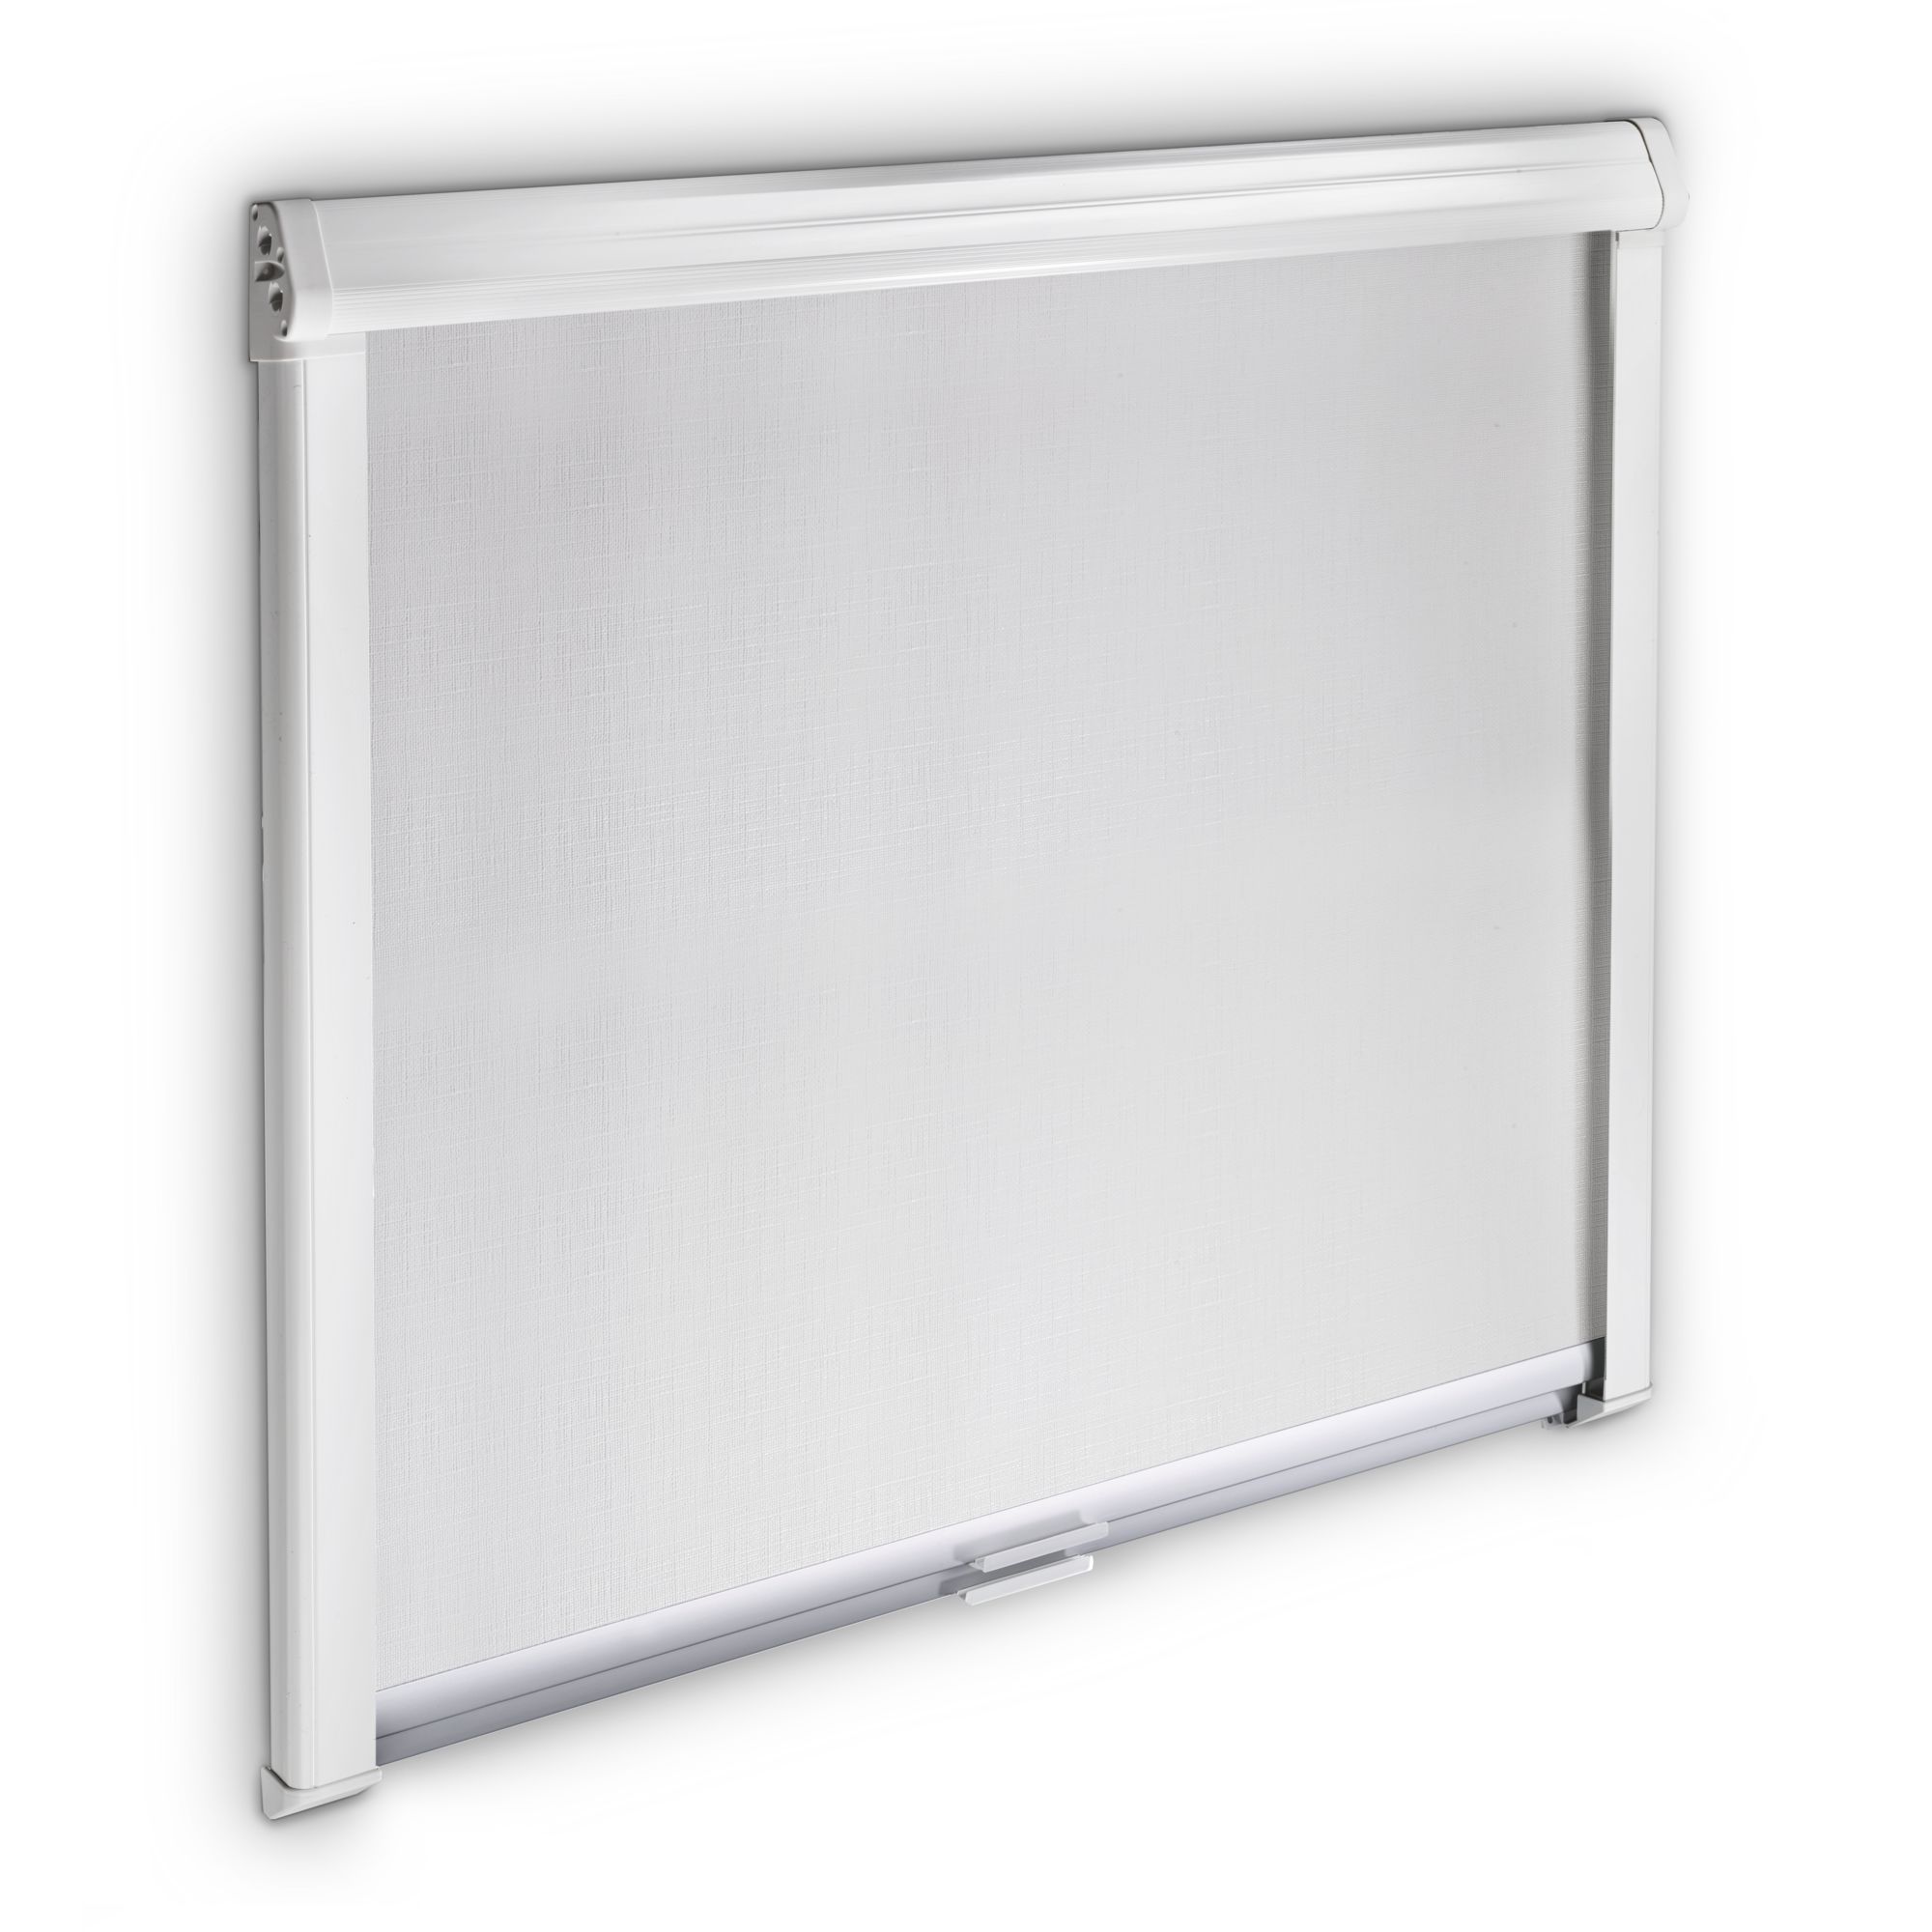 Dometic Black-Out Roller Blind 3000, 1510 x 810 mm, grey-white